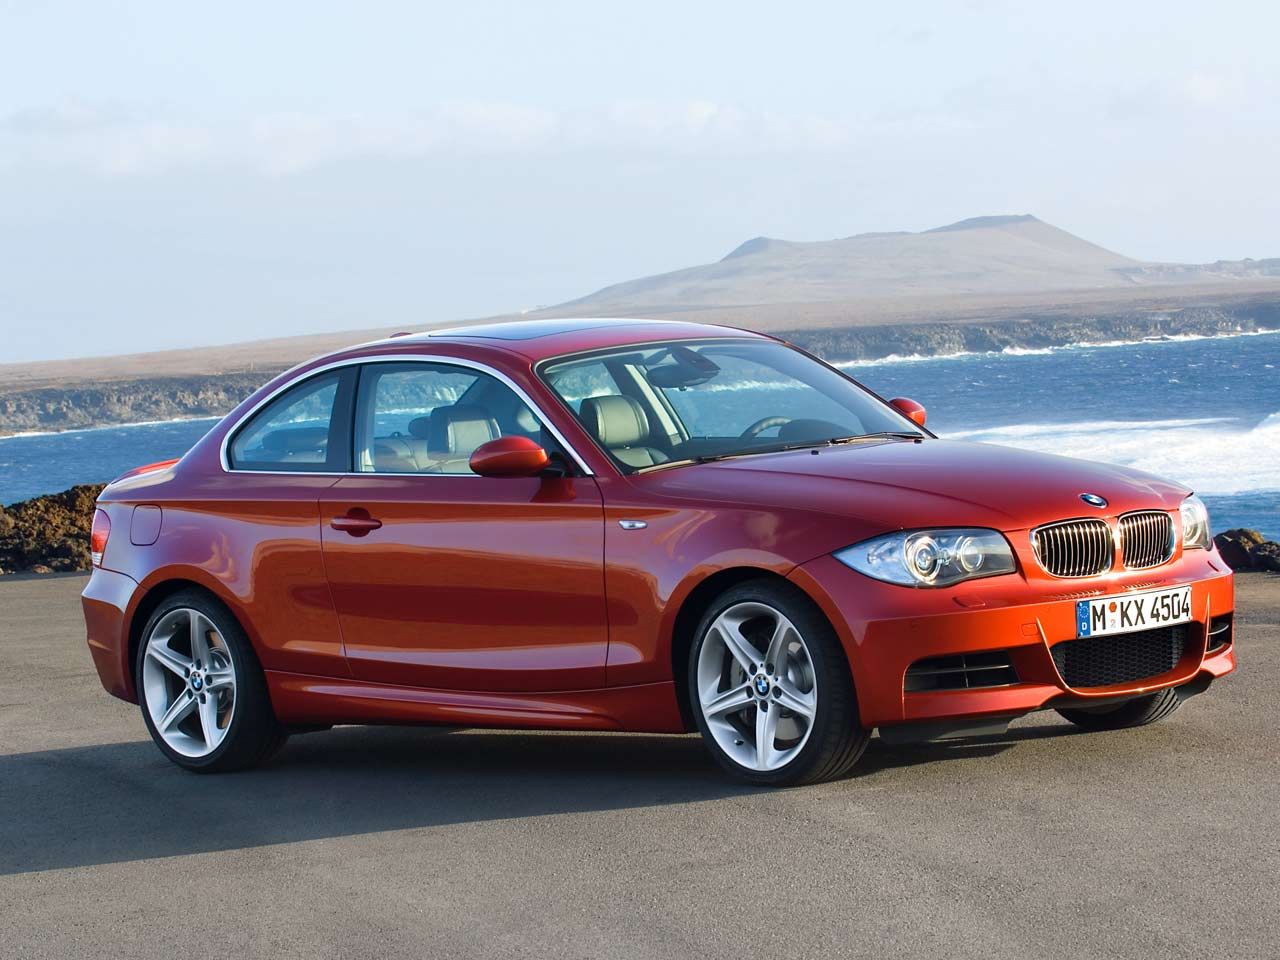 bmw 135i Wallpapers |Cars Wallpapers And Pictures car images,car pics ...